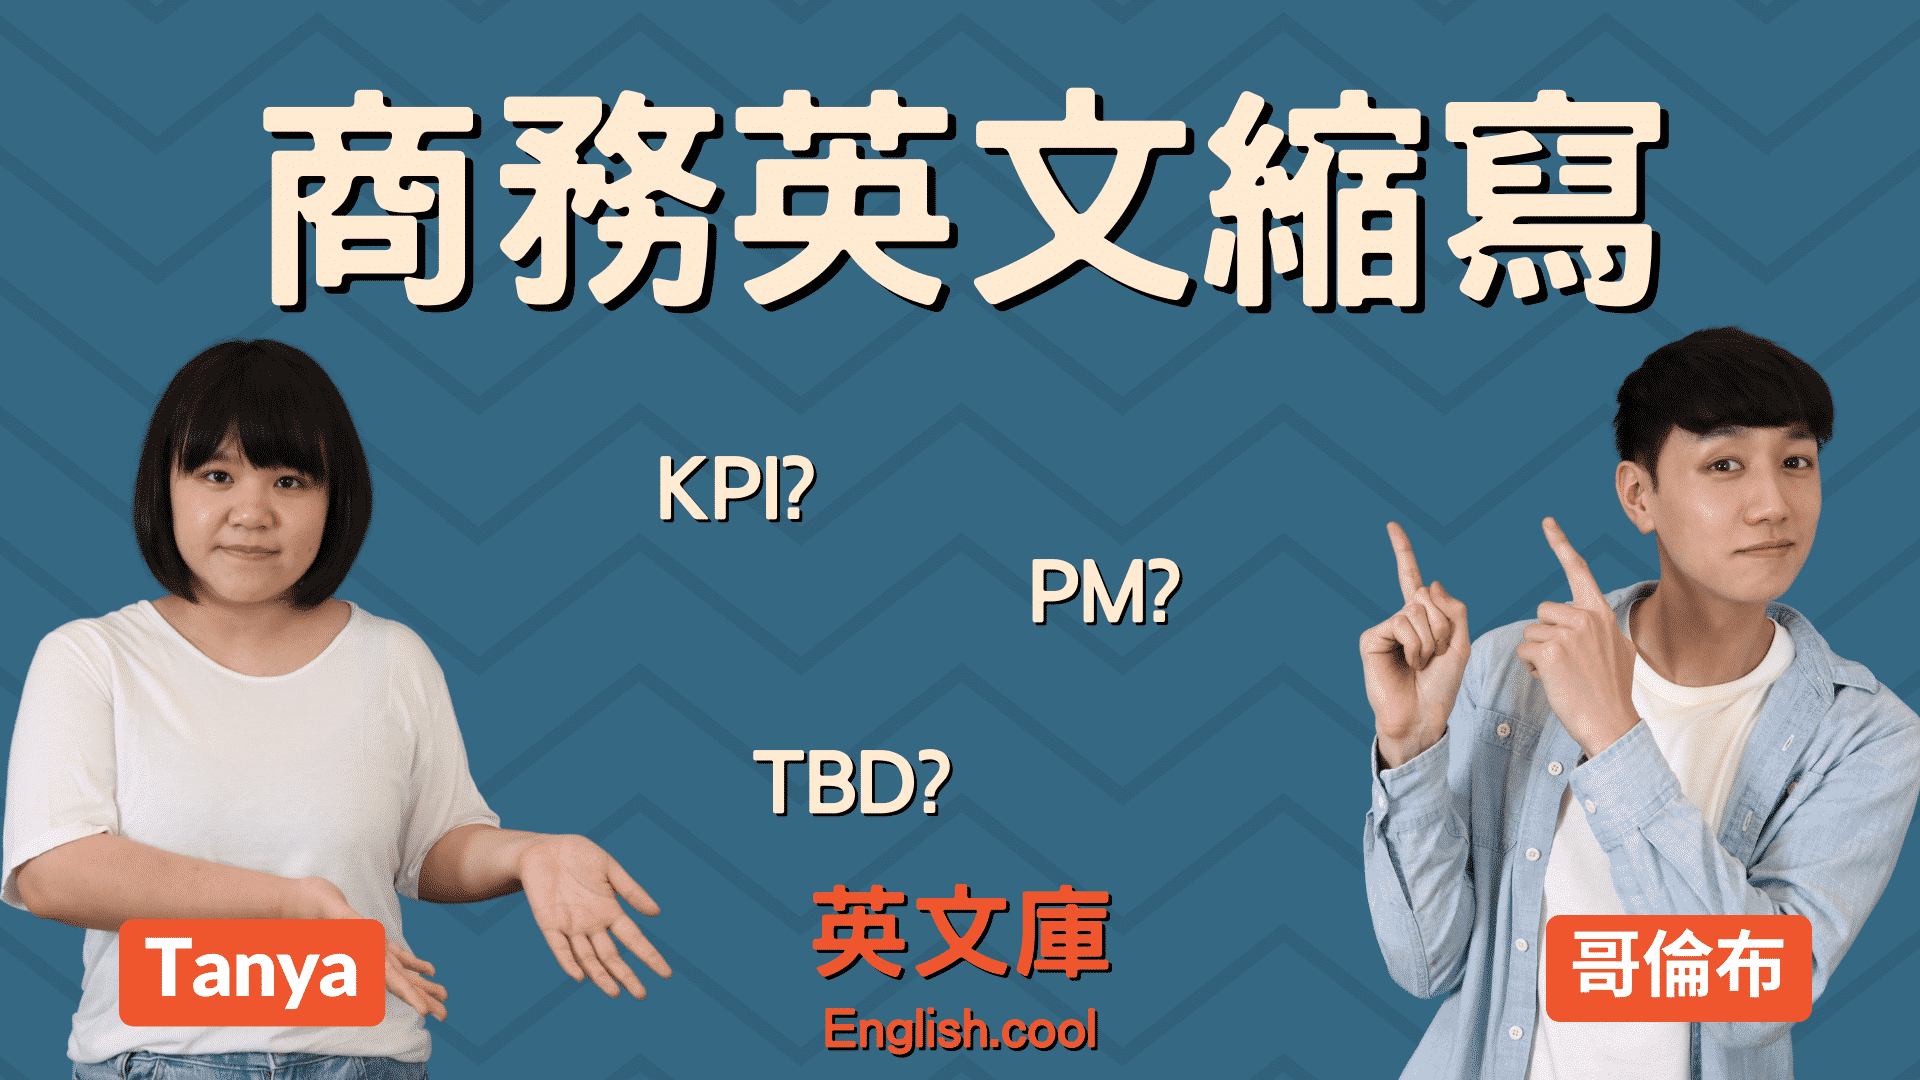 You are currently viewing 【商務縮寫】 KPI、PM、TBD、WFH 等是什麼意思？